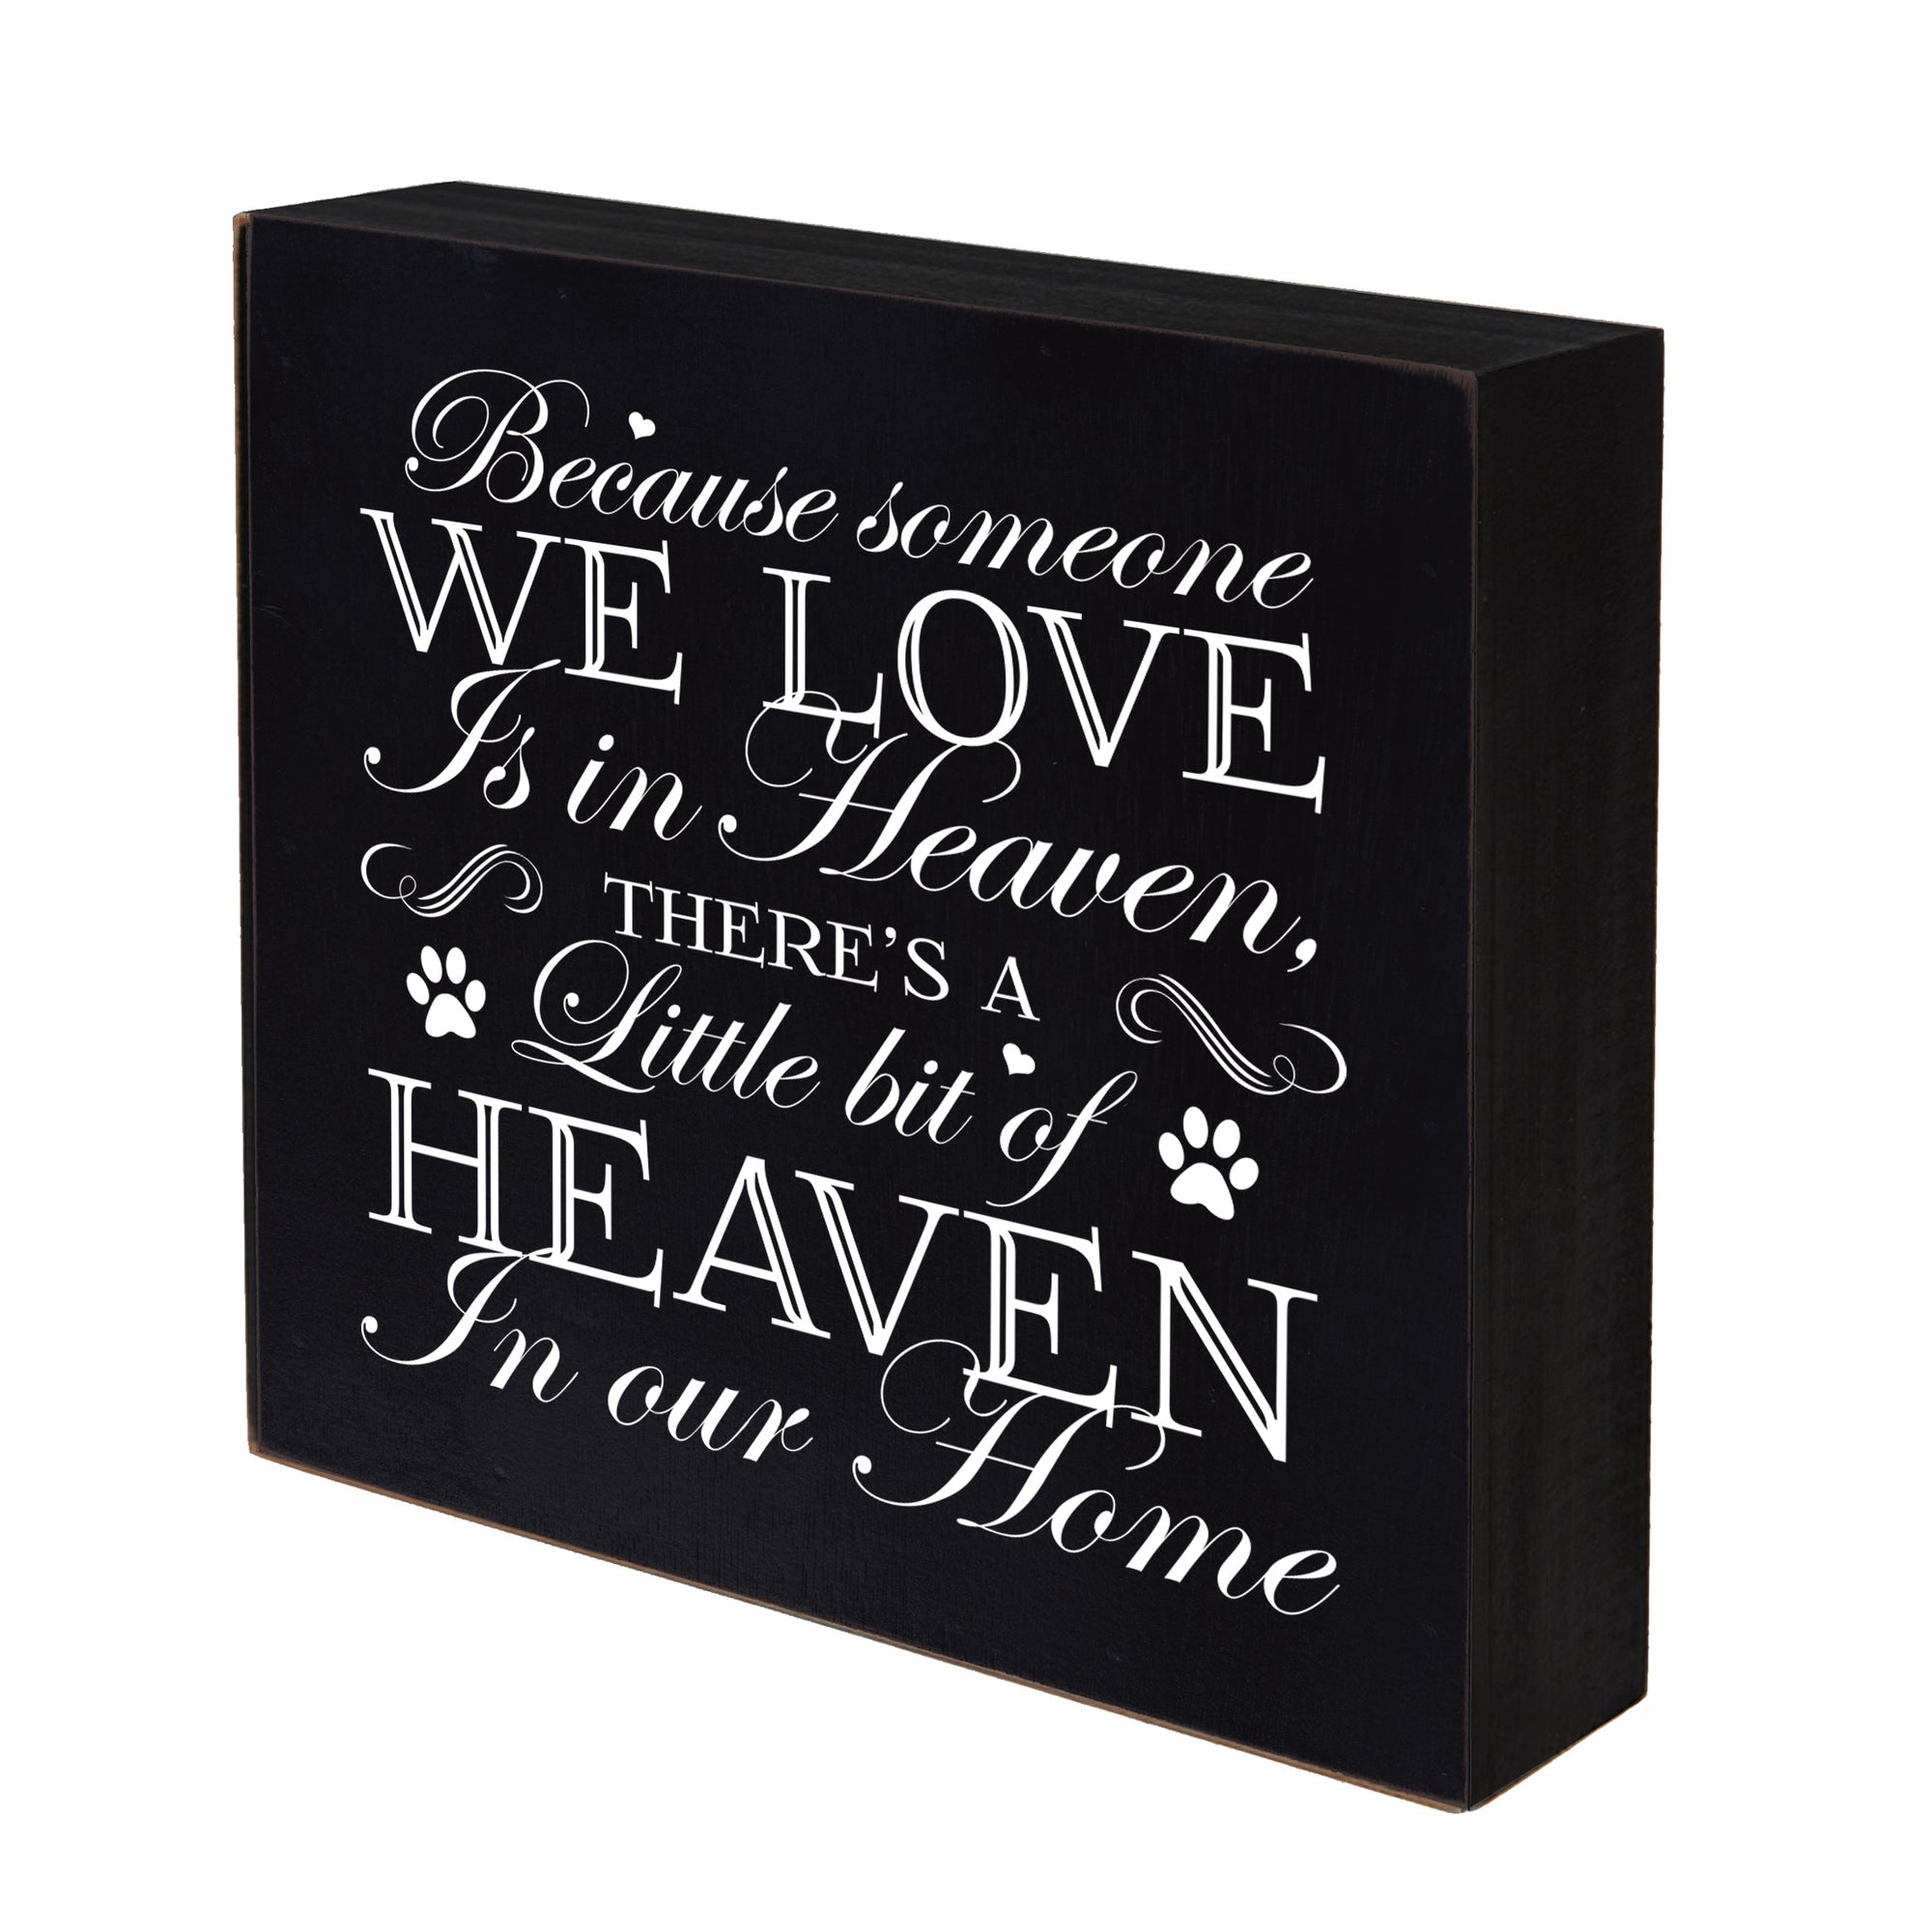 Pet Memorial Shadow Box Décor - Because Someone We Love Is In Heaven